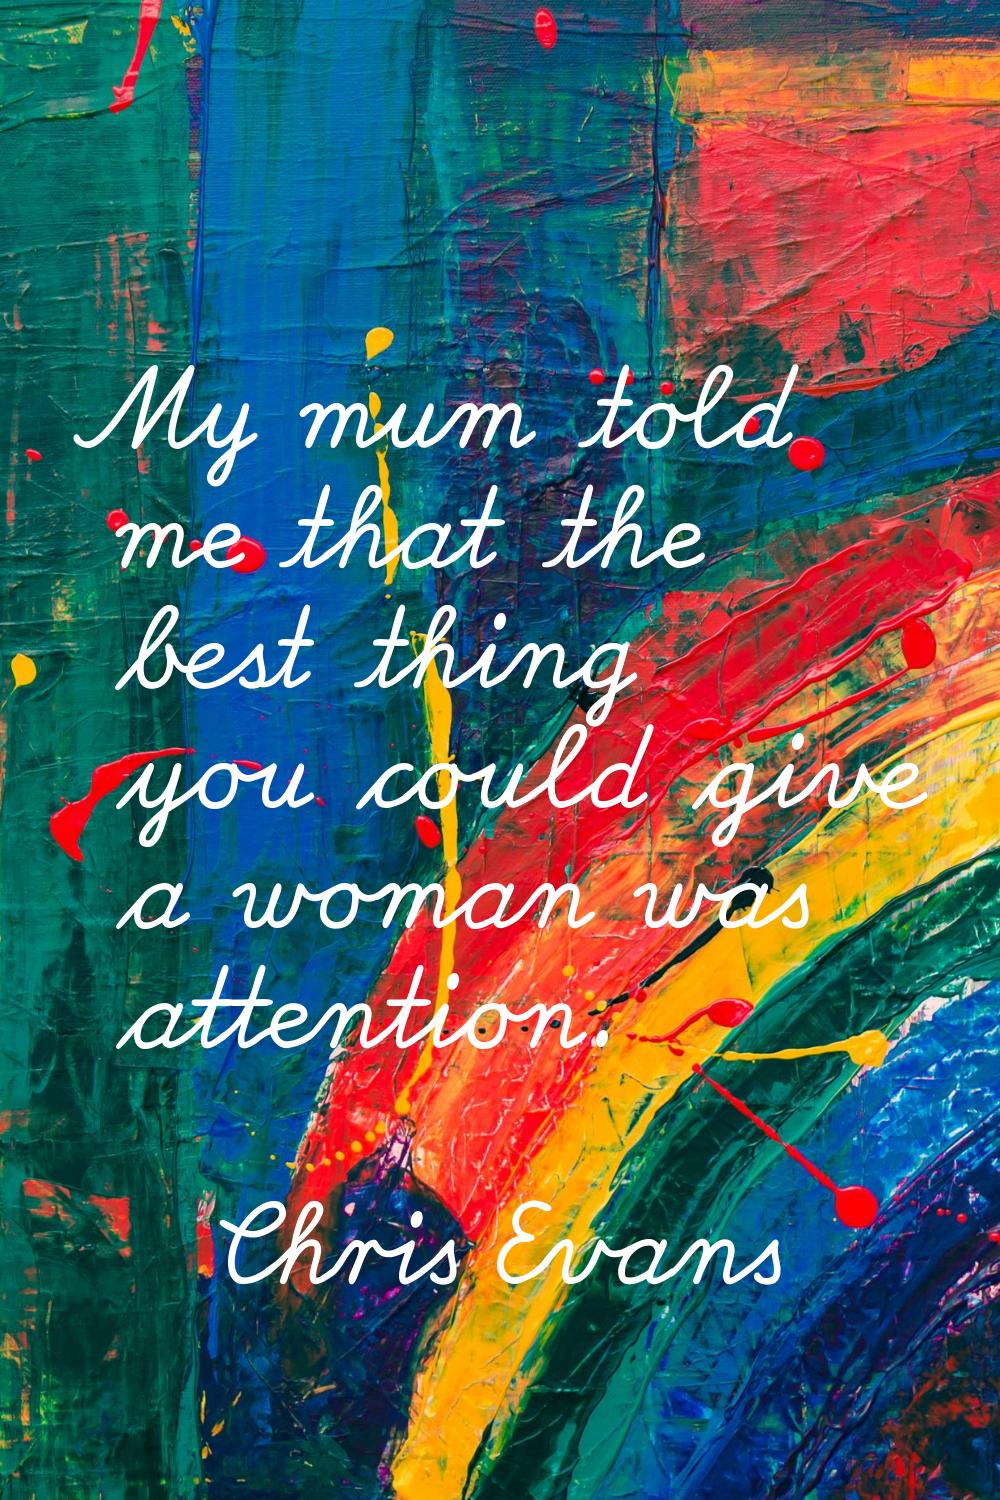 My mum told me that the best thing you could give a woman was attention.